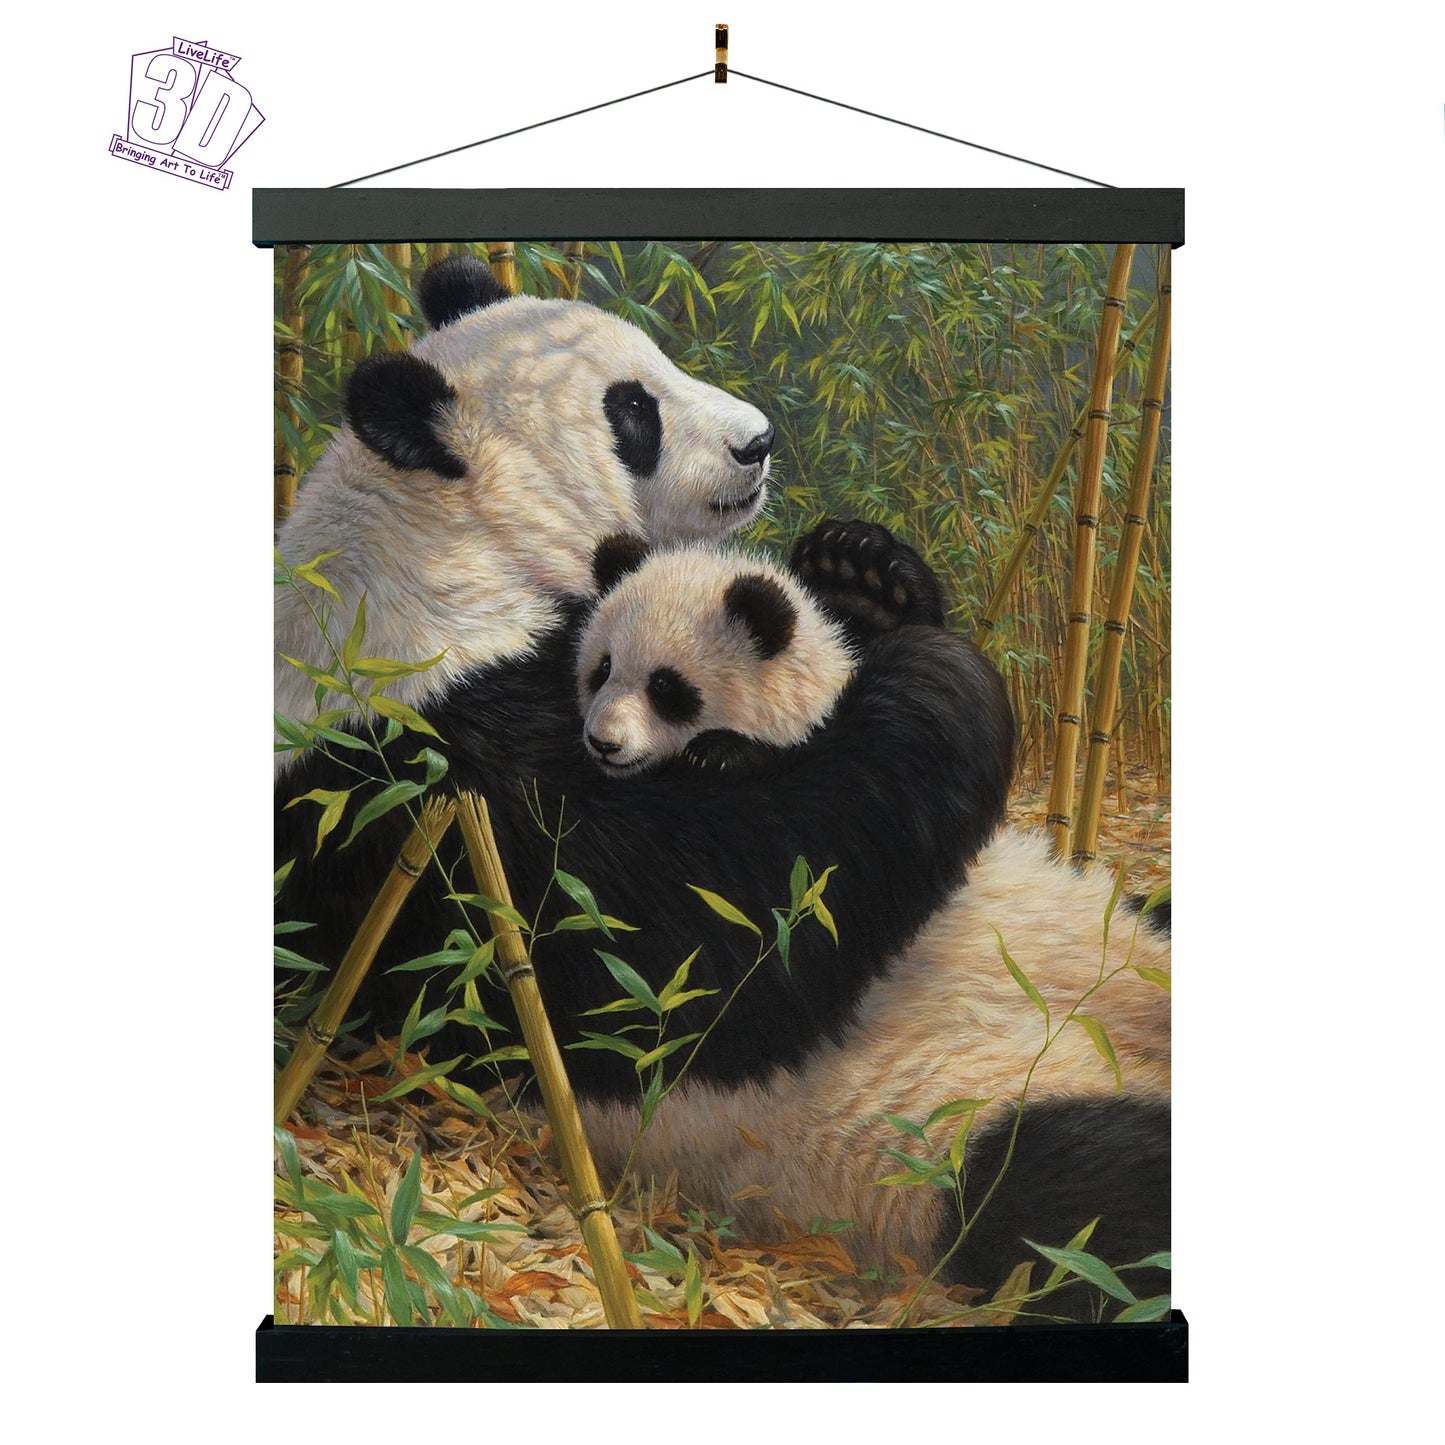 3D LiveLife Lenticular Wall Art Prints - A New Dynasty from Deluxebase. Unframed 3D Panda Poster. Perfect wall decor. Original artwork licensed from renowned artist, Beth Hoselton